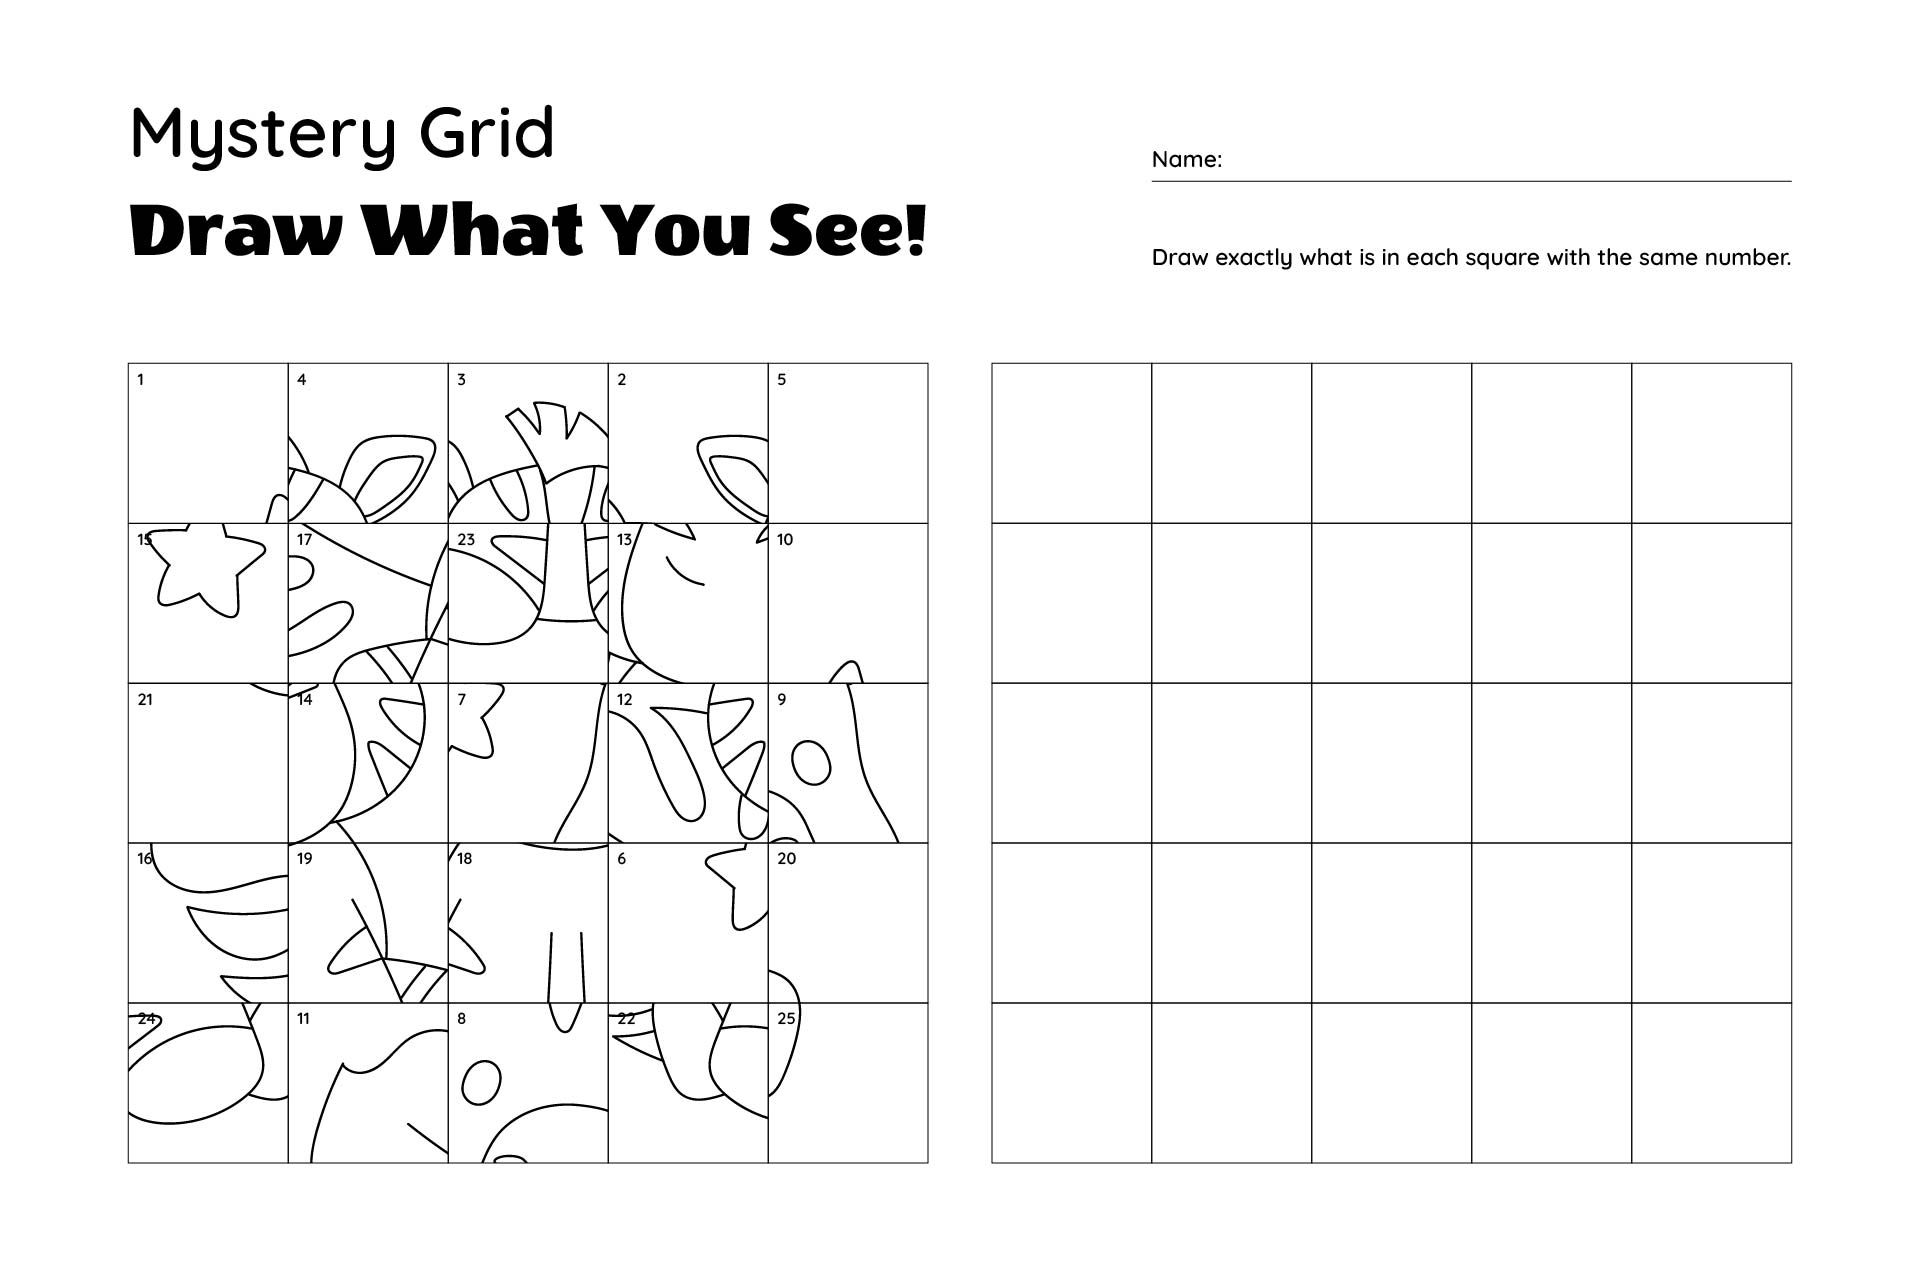 5-best-images-of-mystery-grid-drawing-worksheets-printables-mystery